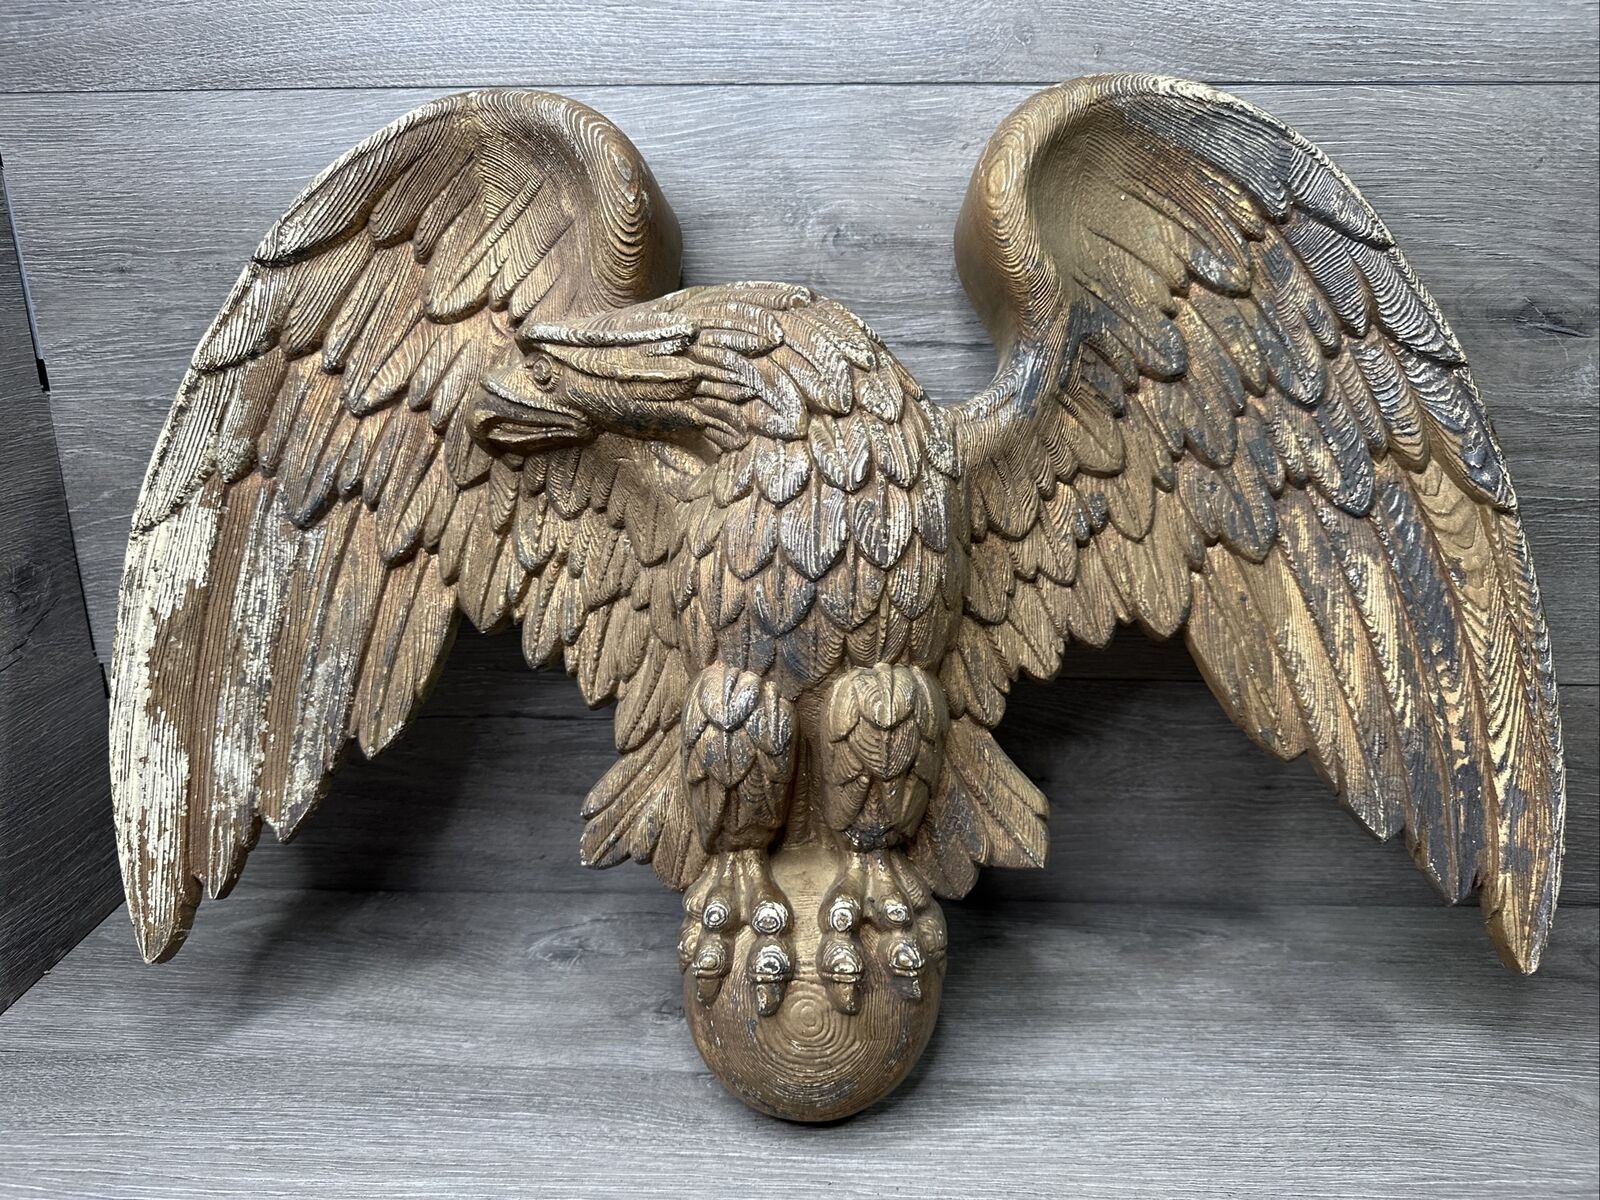 Burwood Products Molded Eagle Wall Decor. # 4256 Large 24.5 in Span Vintage